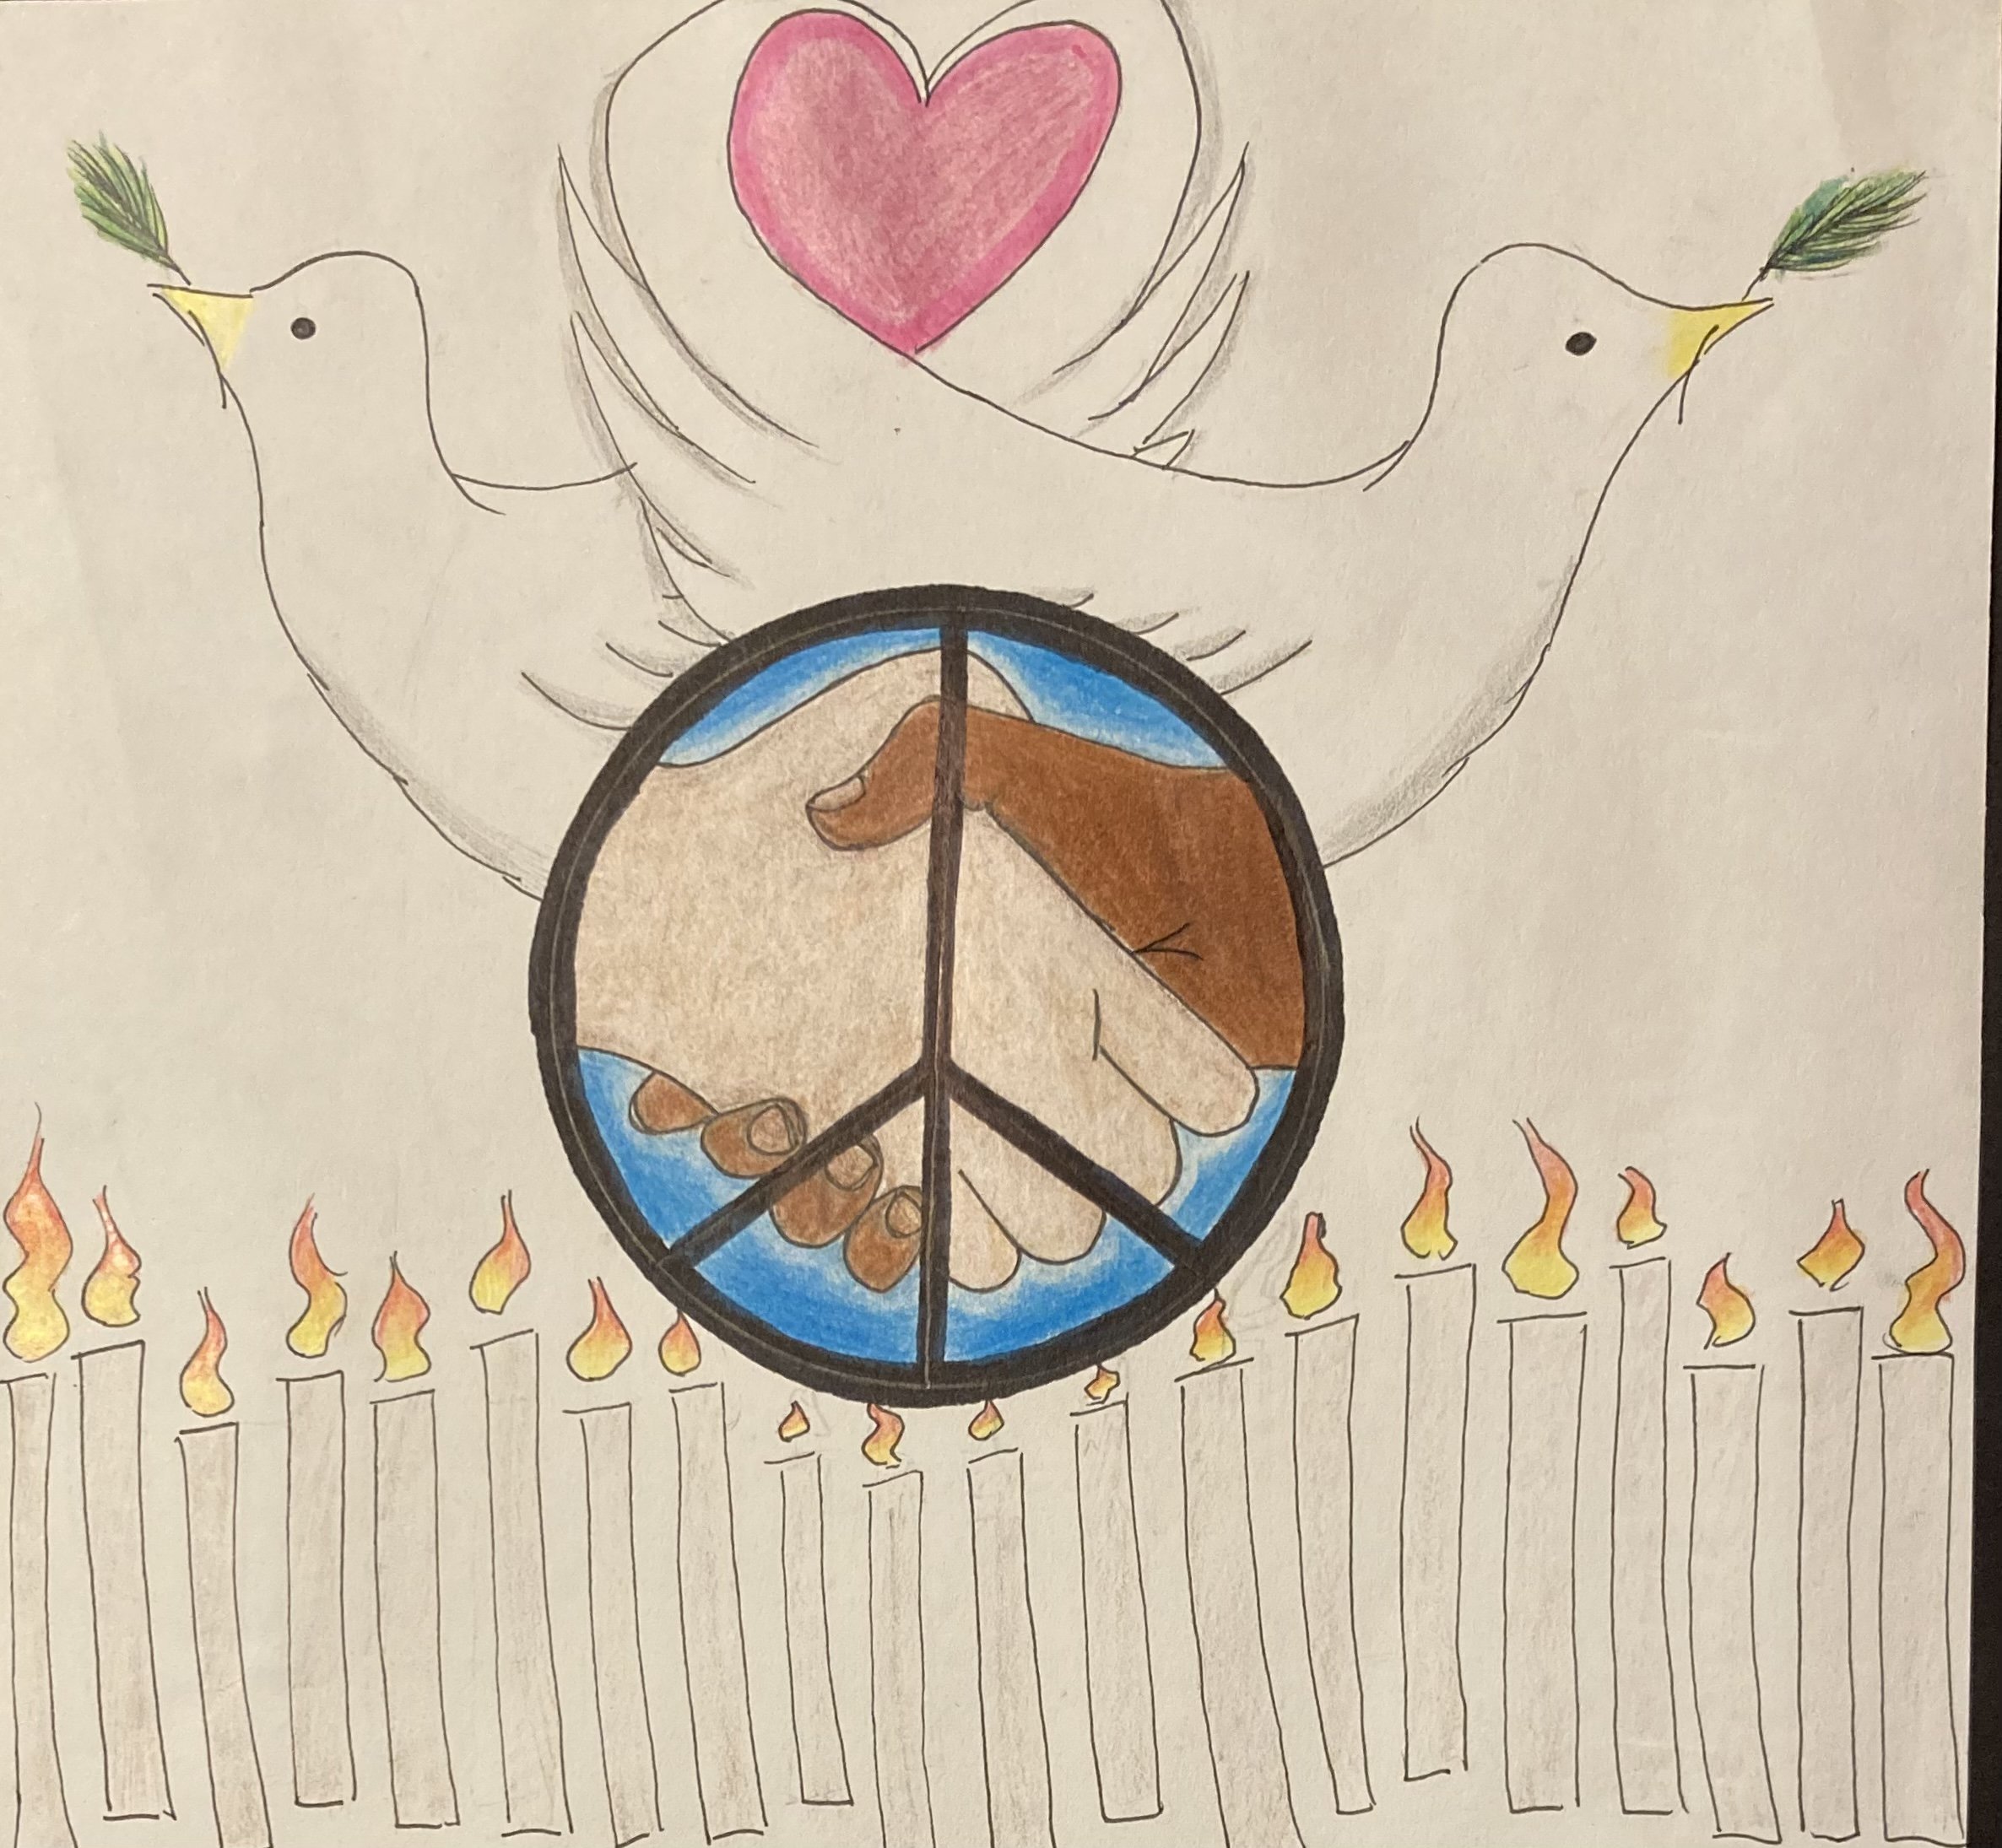 18 youth artists had their peace art displayed at the Seaford District Library.